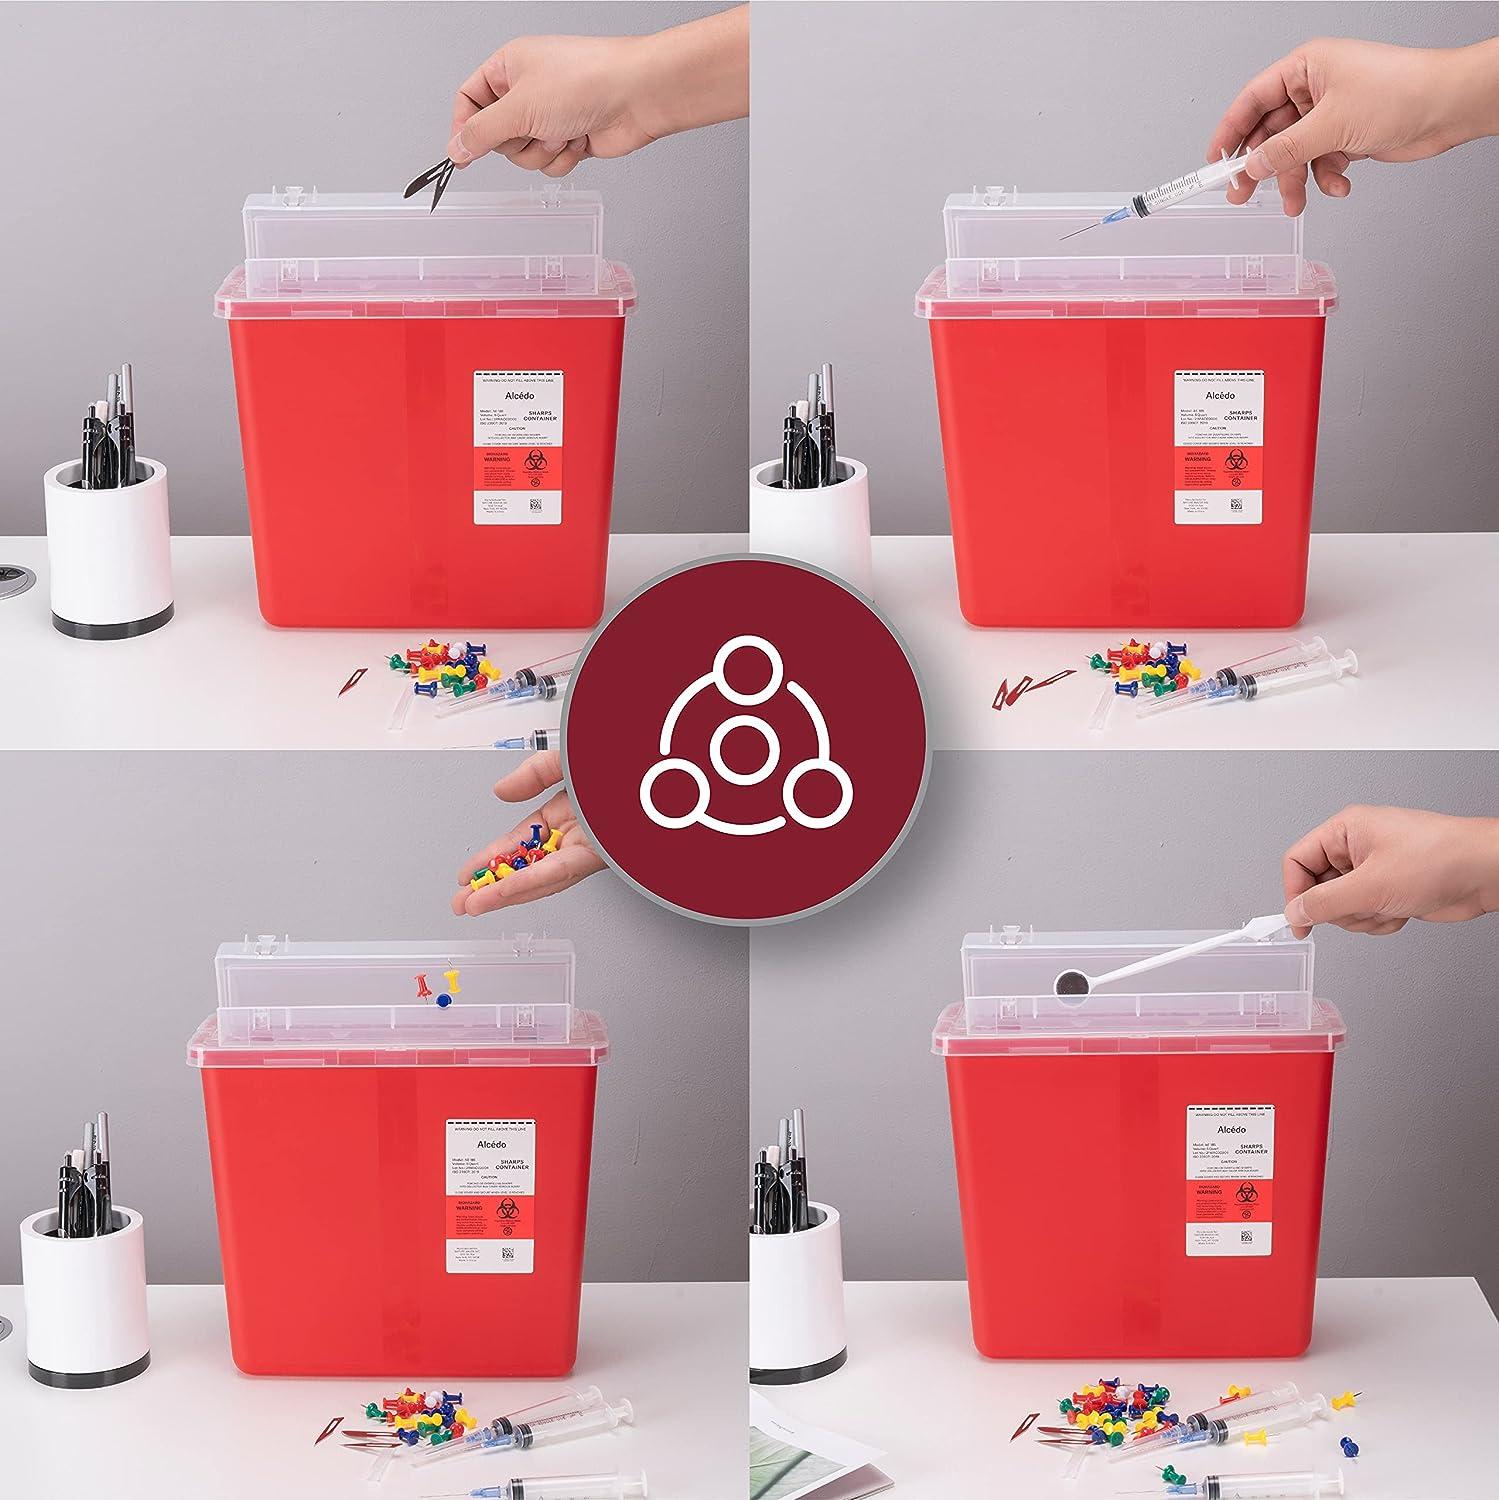 Alcedo Sharps Container for Home and Professional Use 2 Quart (3-Pack), Biohazard Needle and Syringe Disposal, Medical Grade